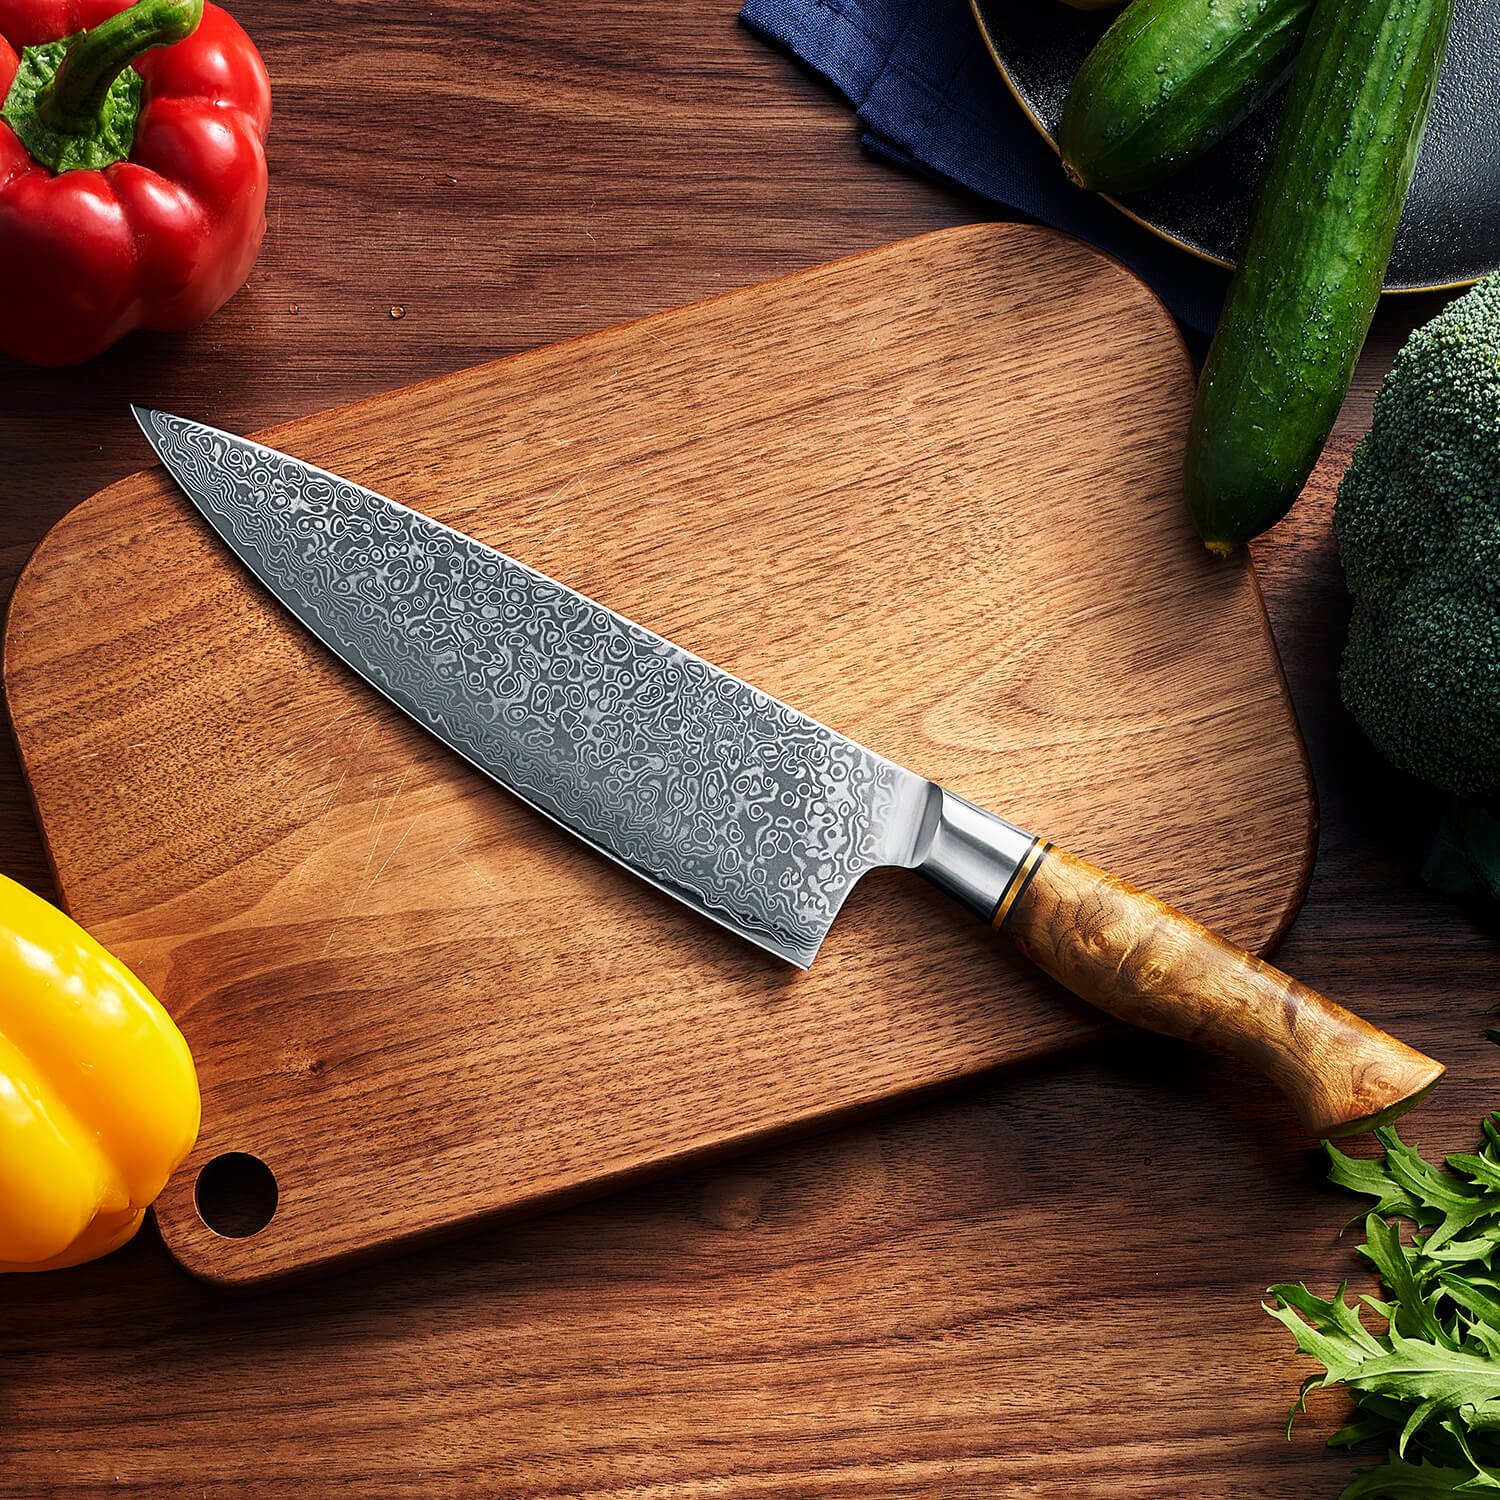 Dynasty Chef Knife Product Image 3